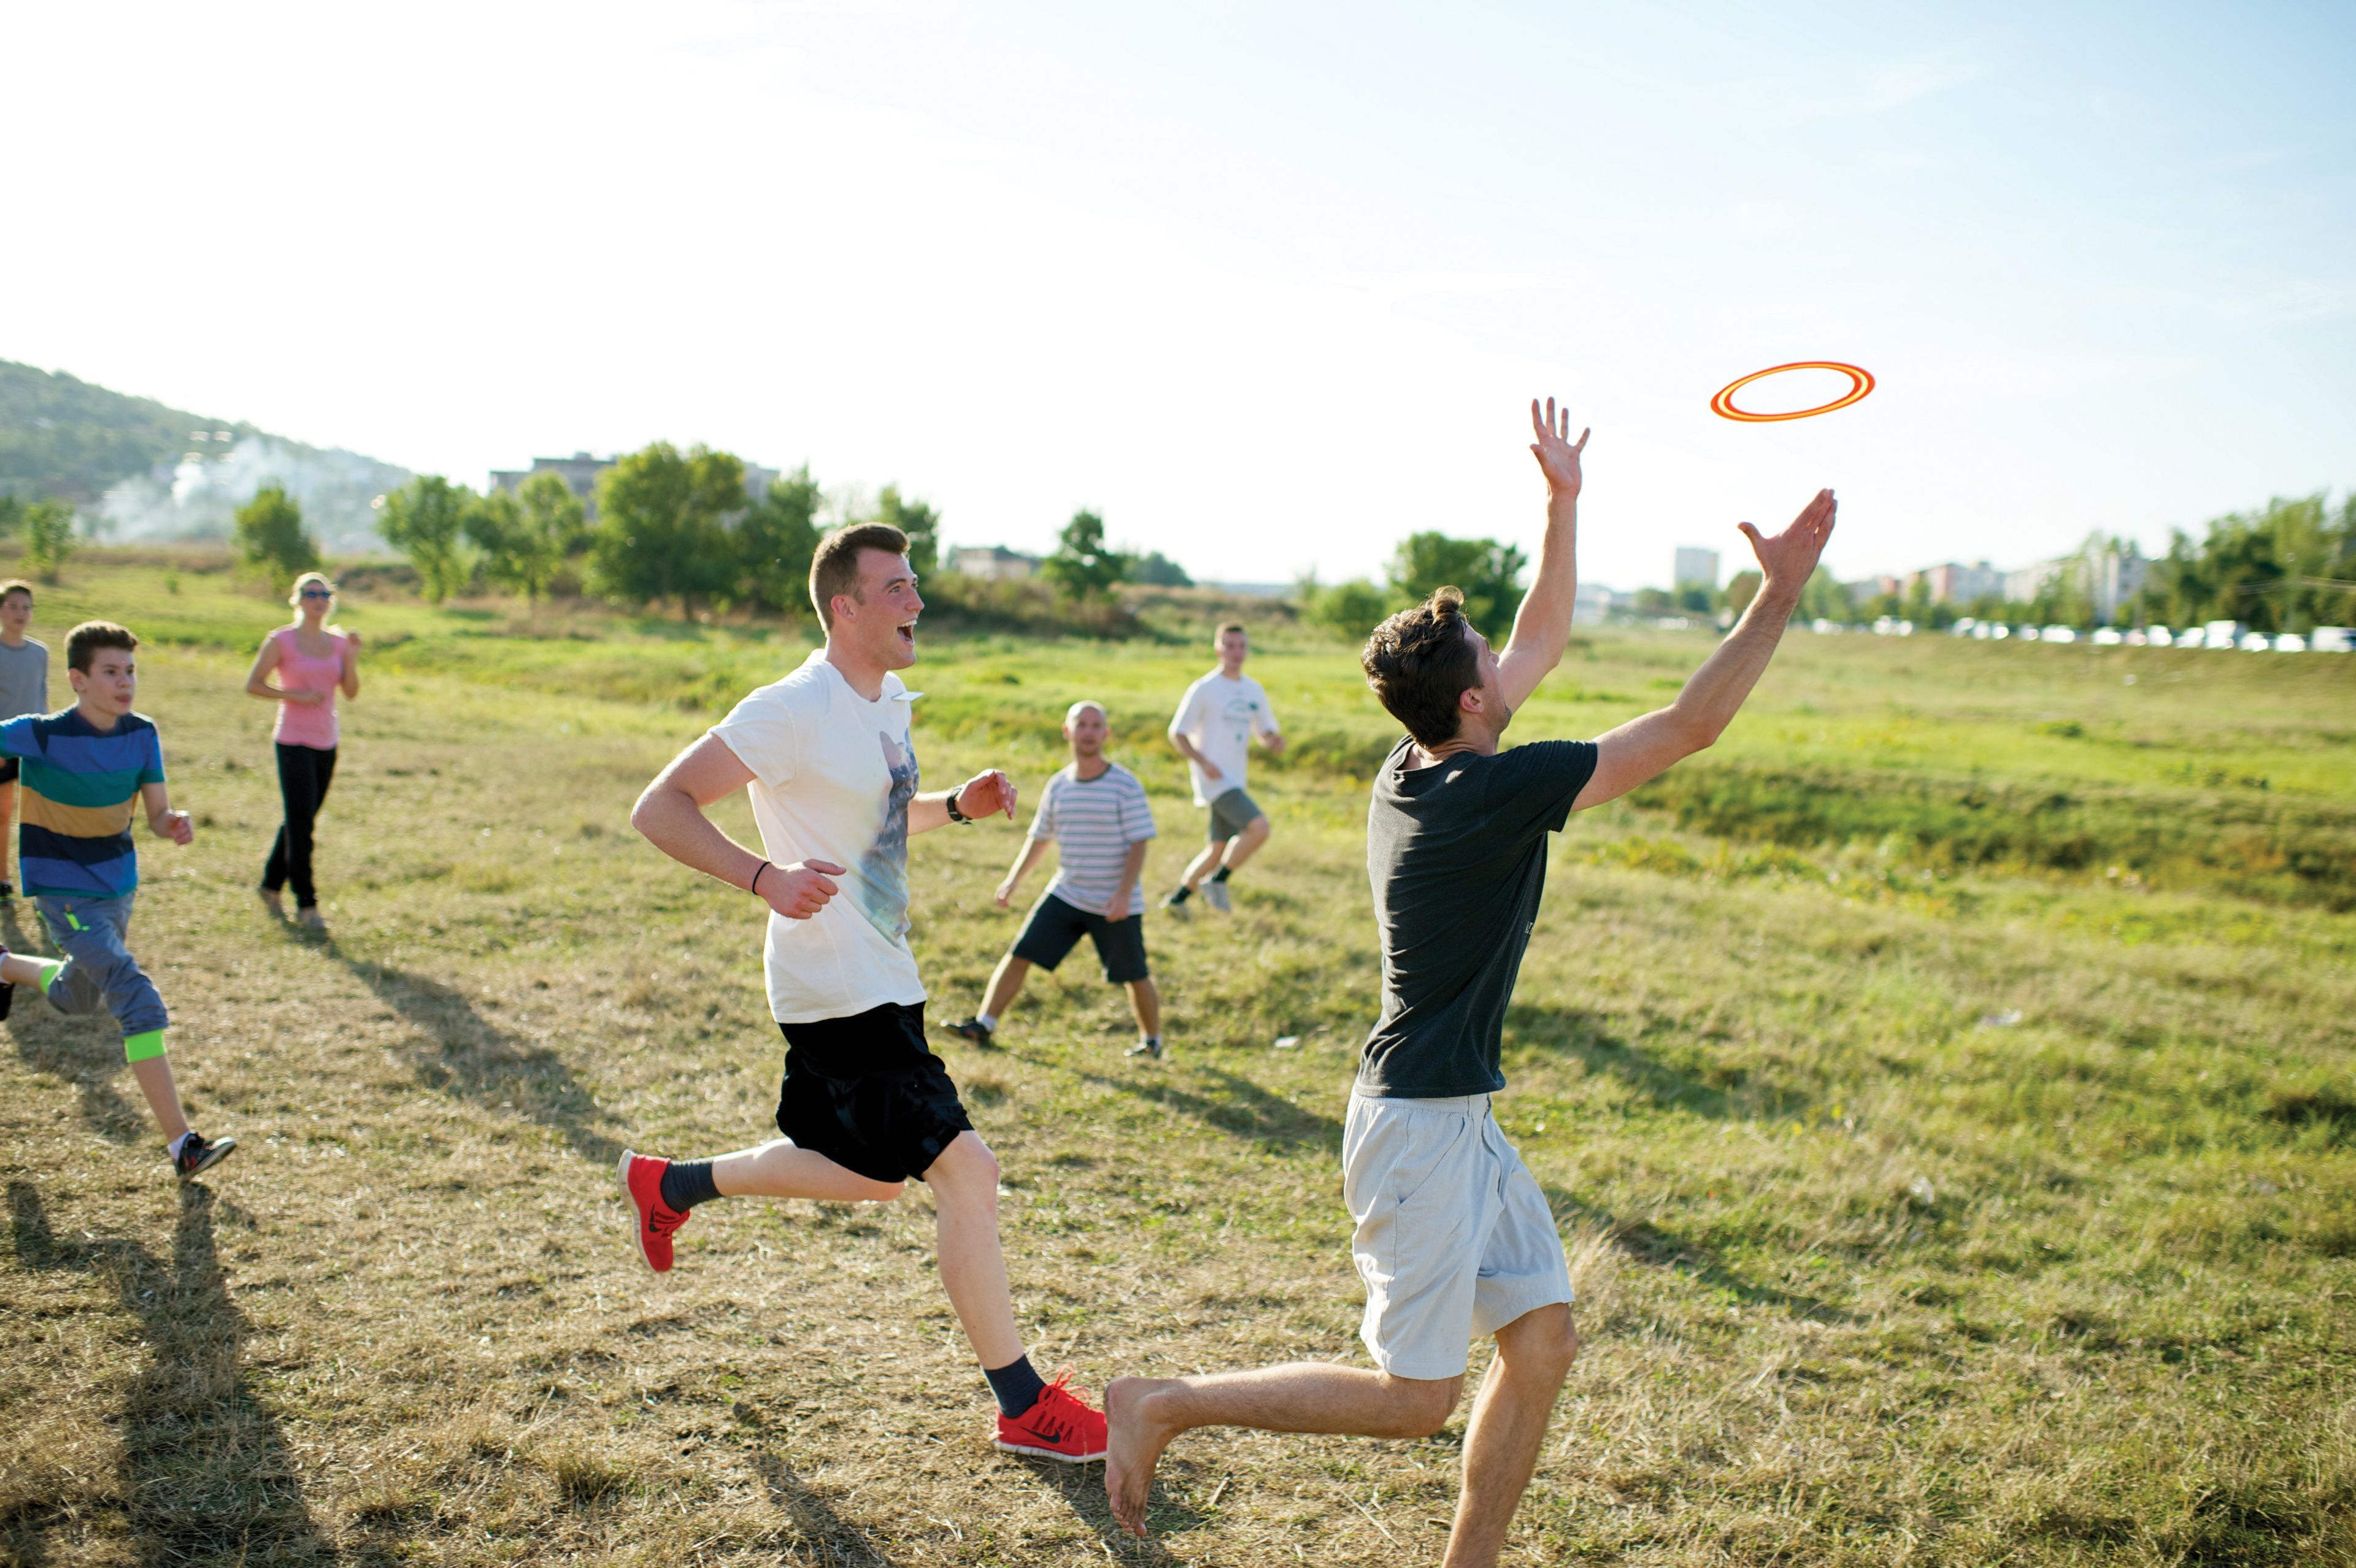 A young man reaches for a Frisbee in the air with other youth running behind him.